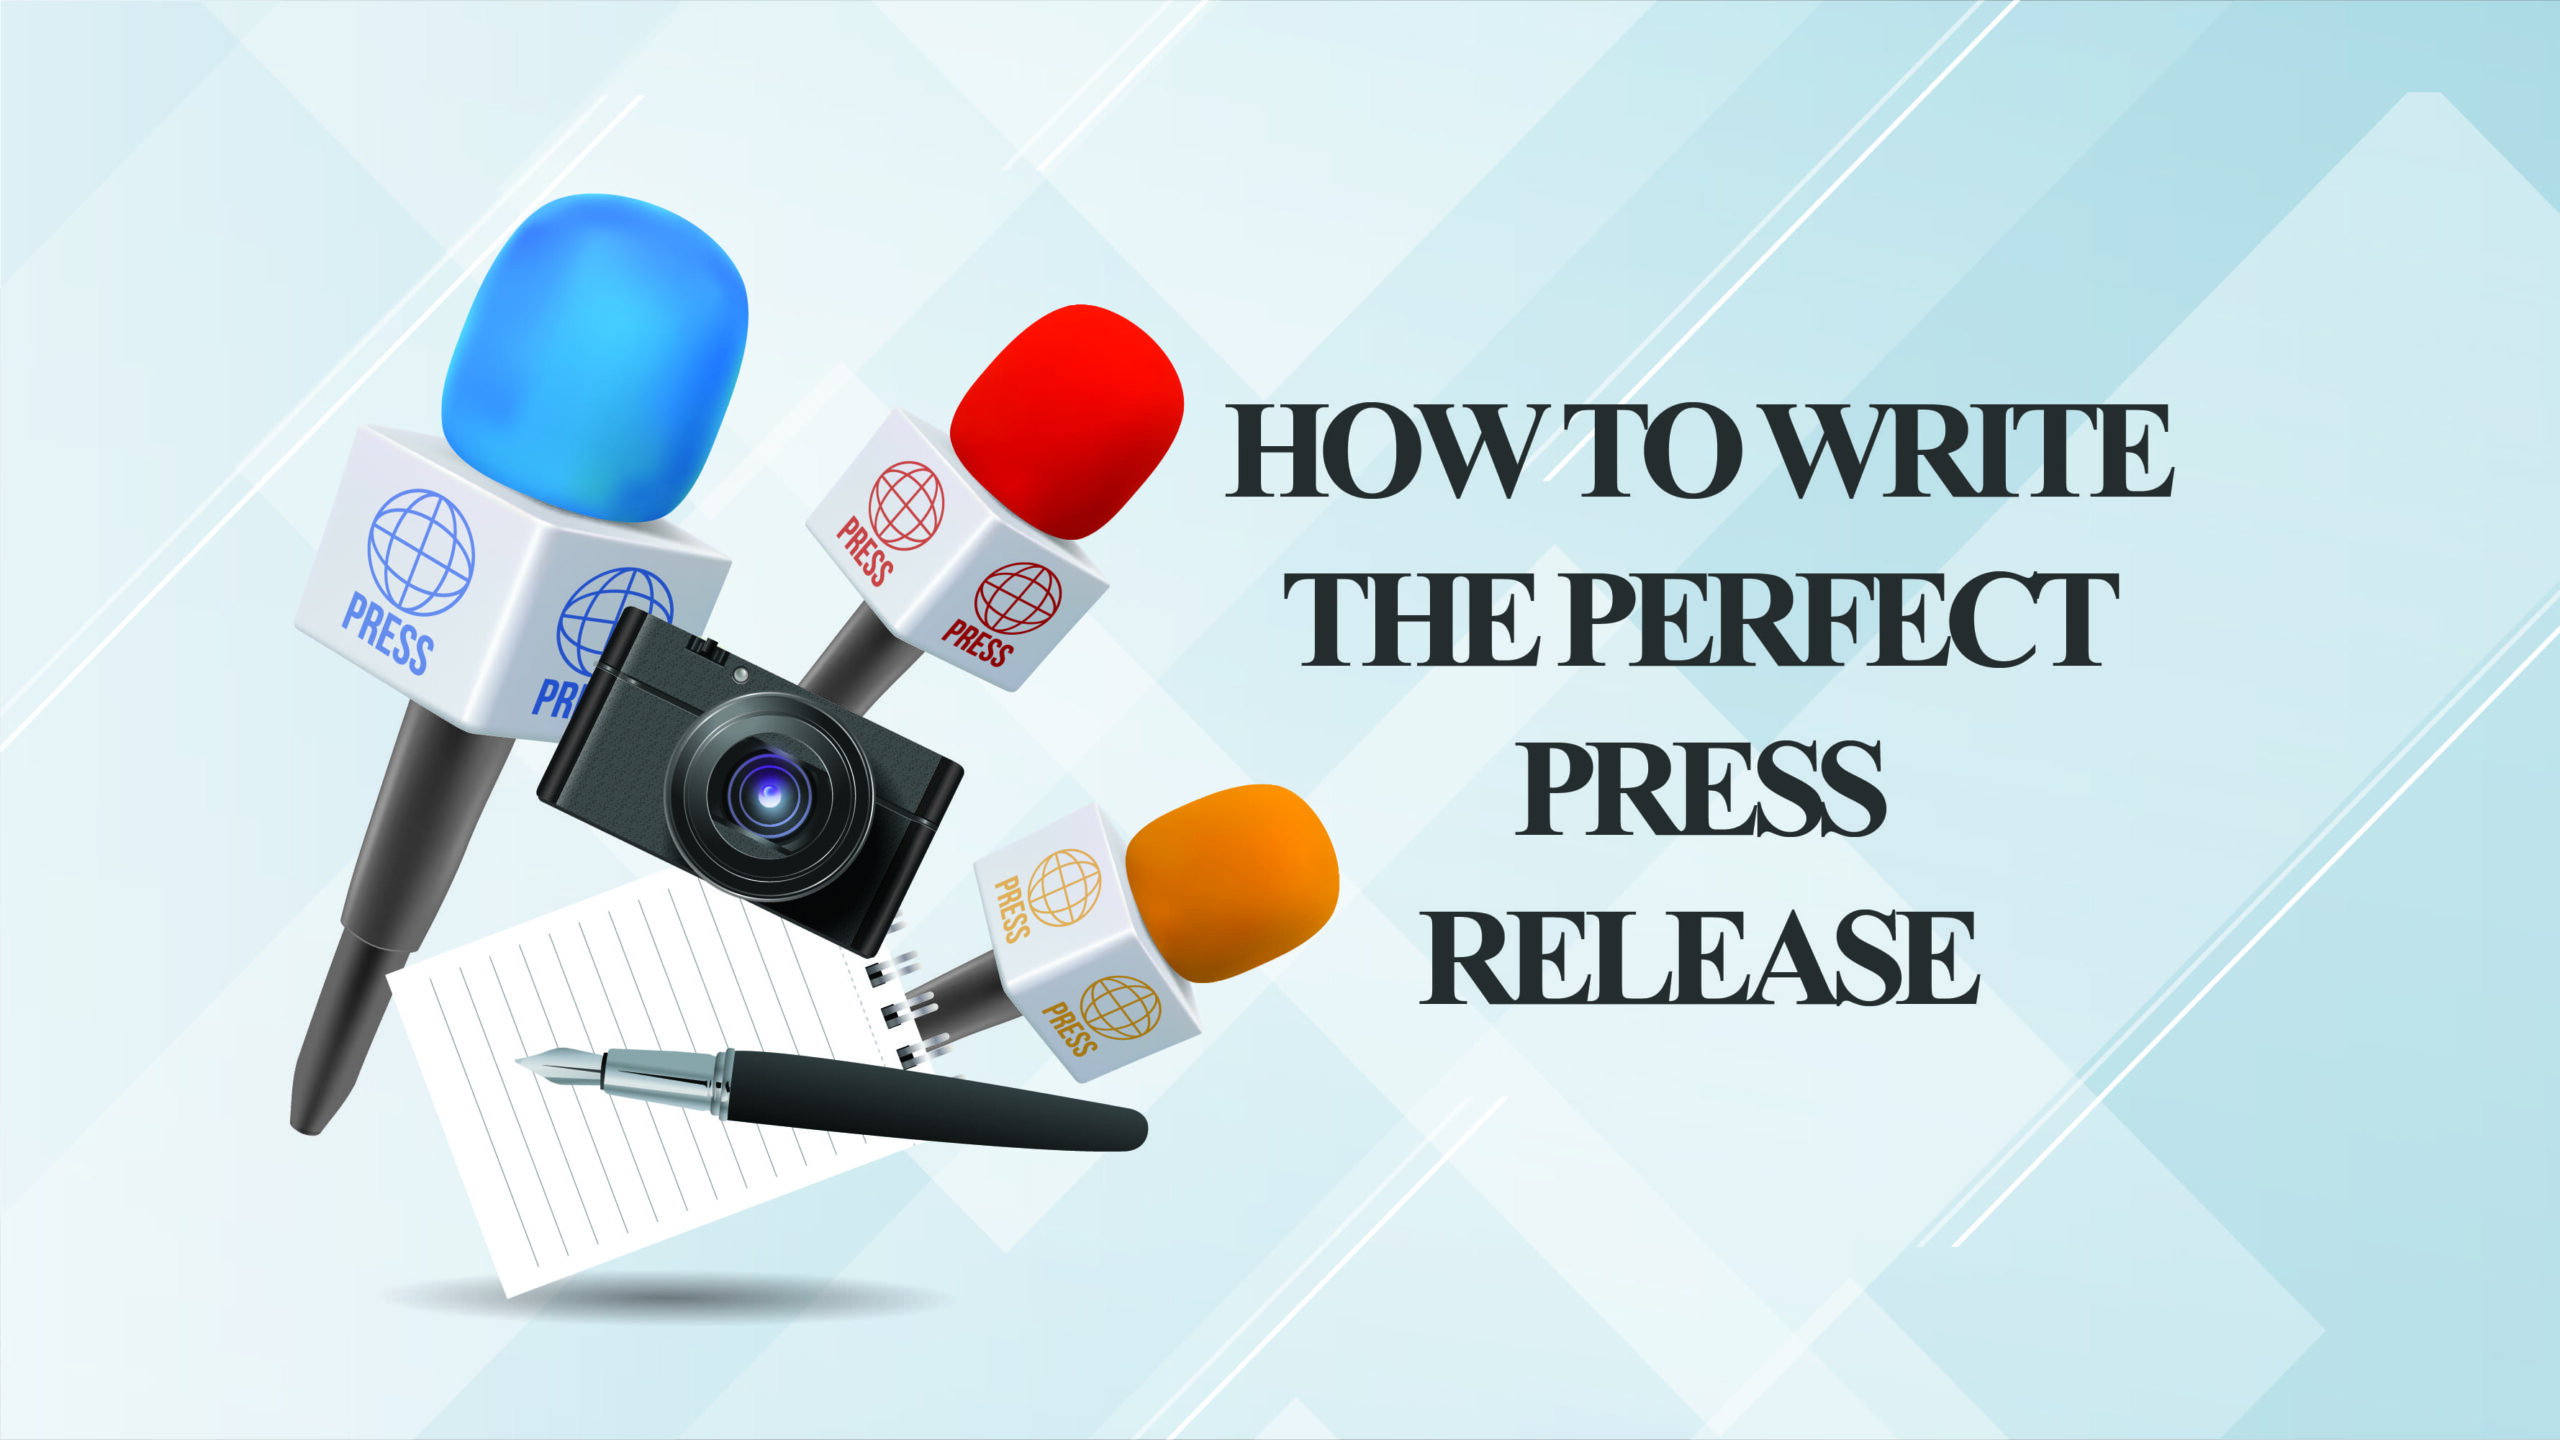 How To Write The Perfect Press Release